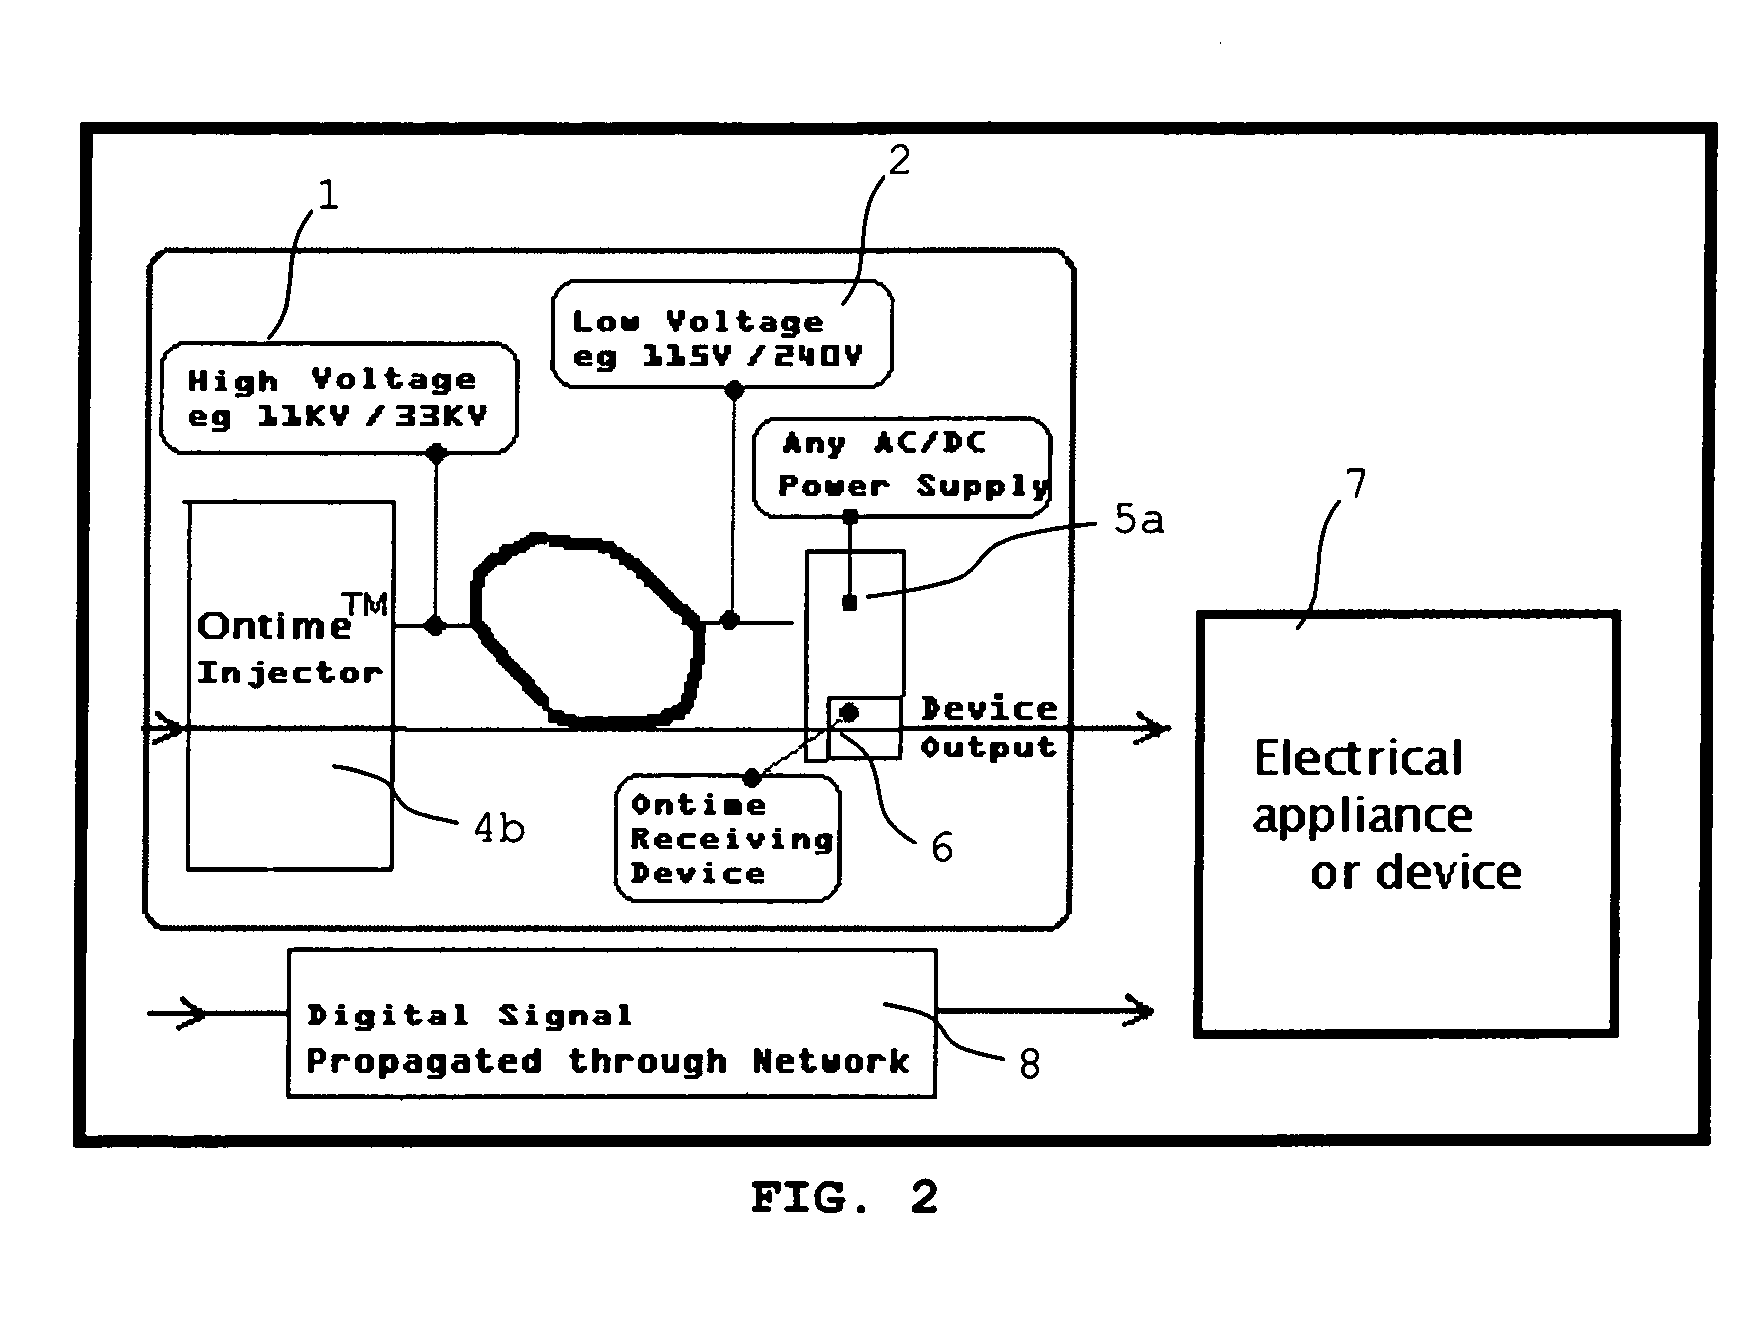 System and method for transmitting control information over an AC power network